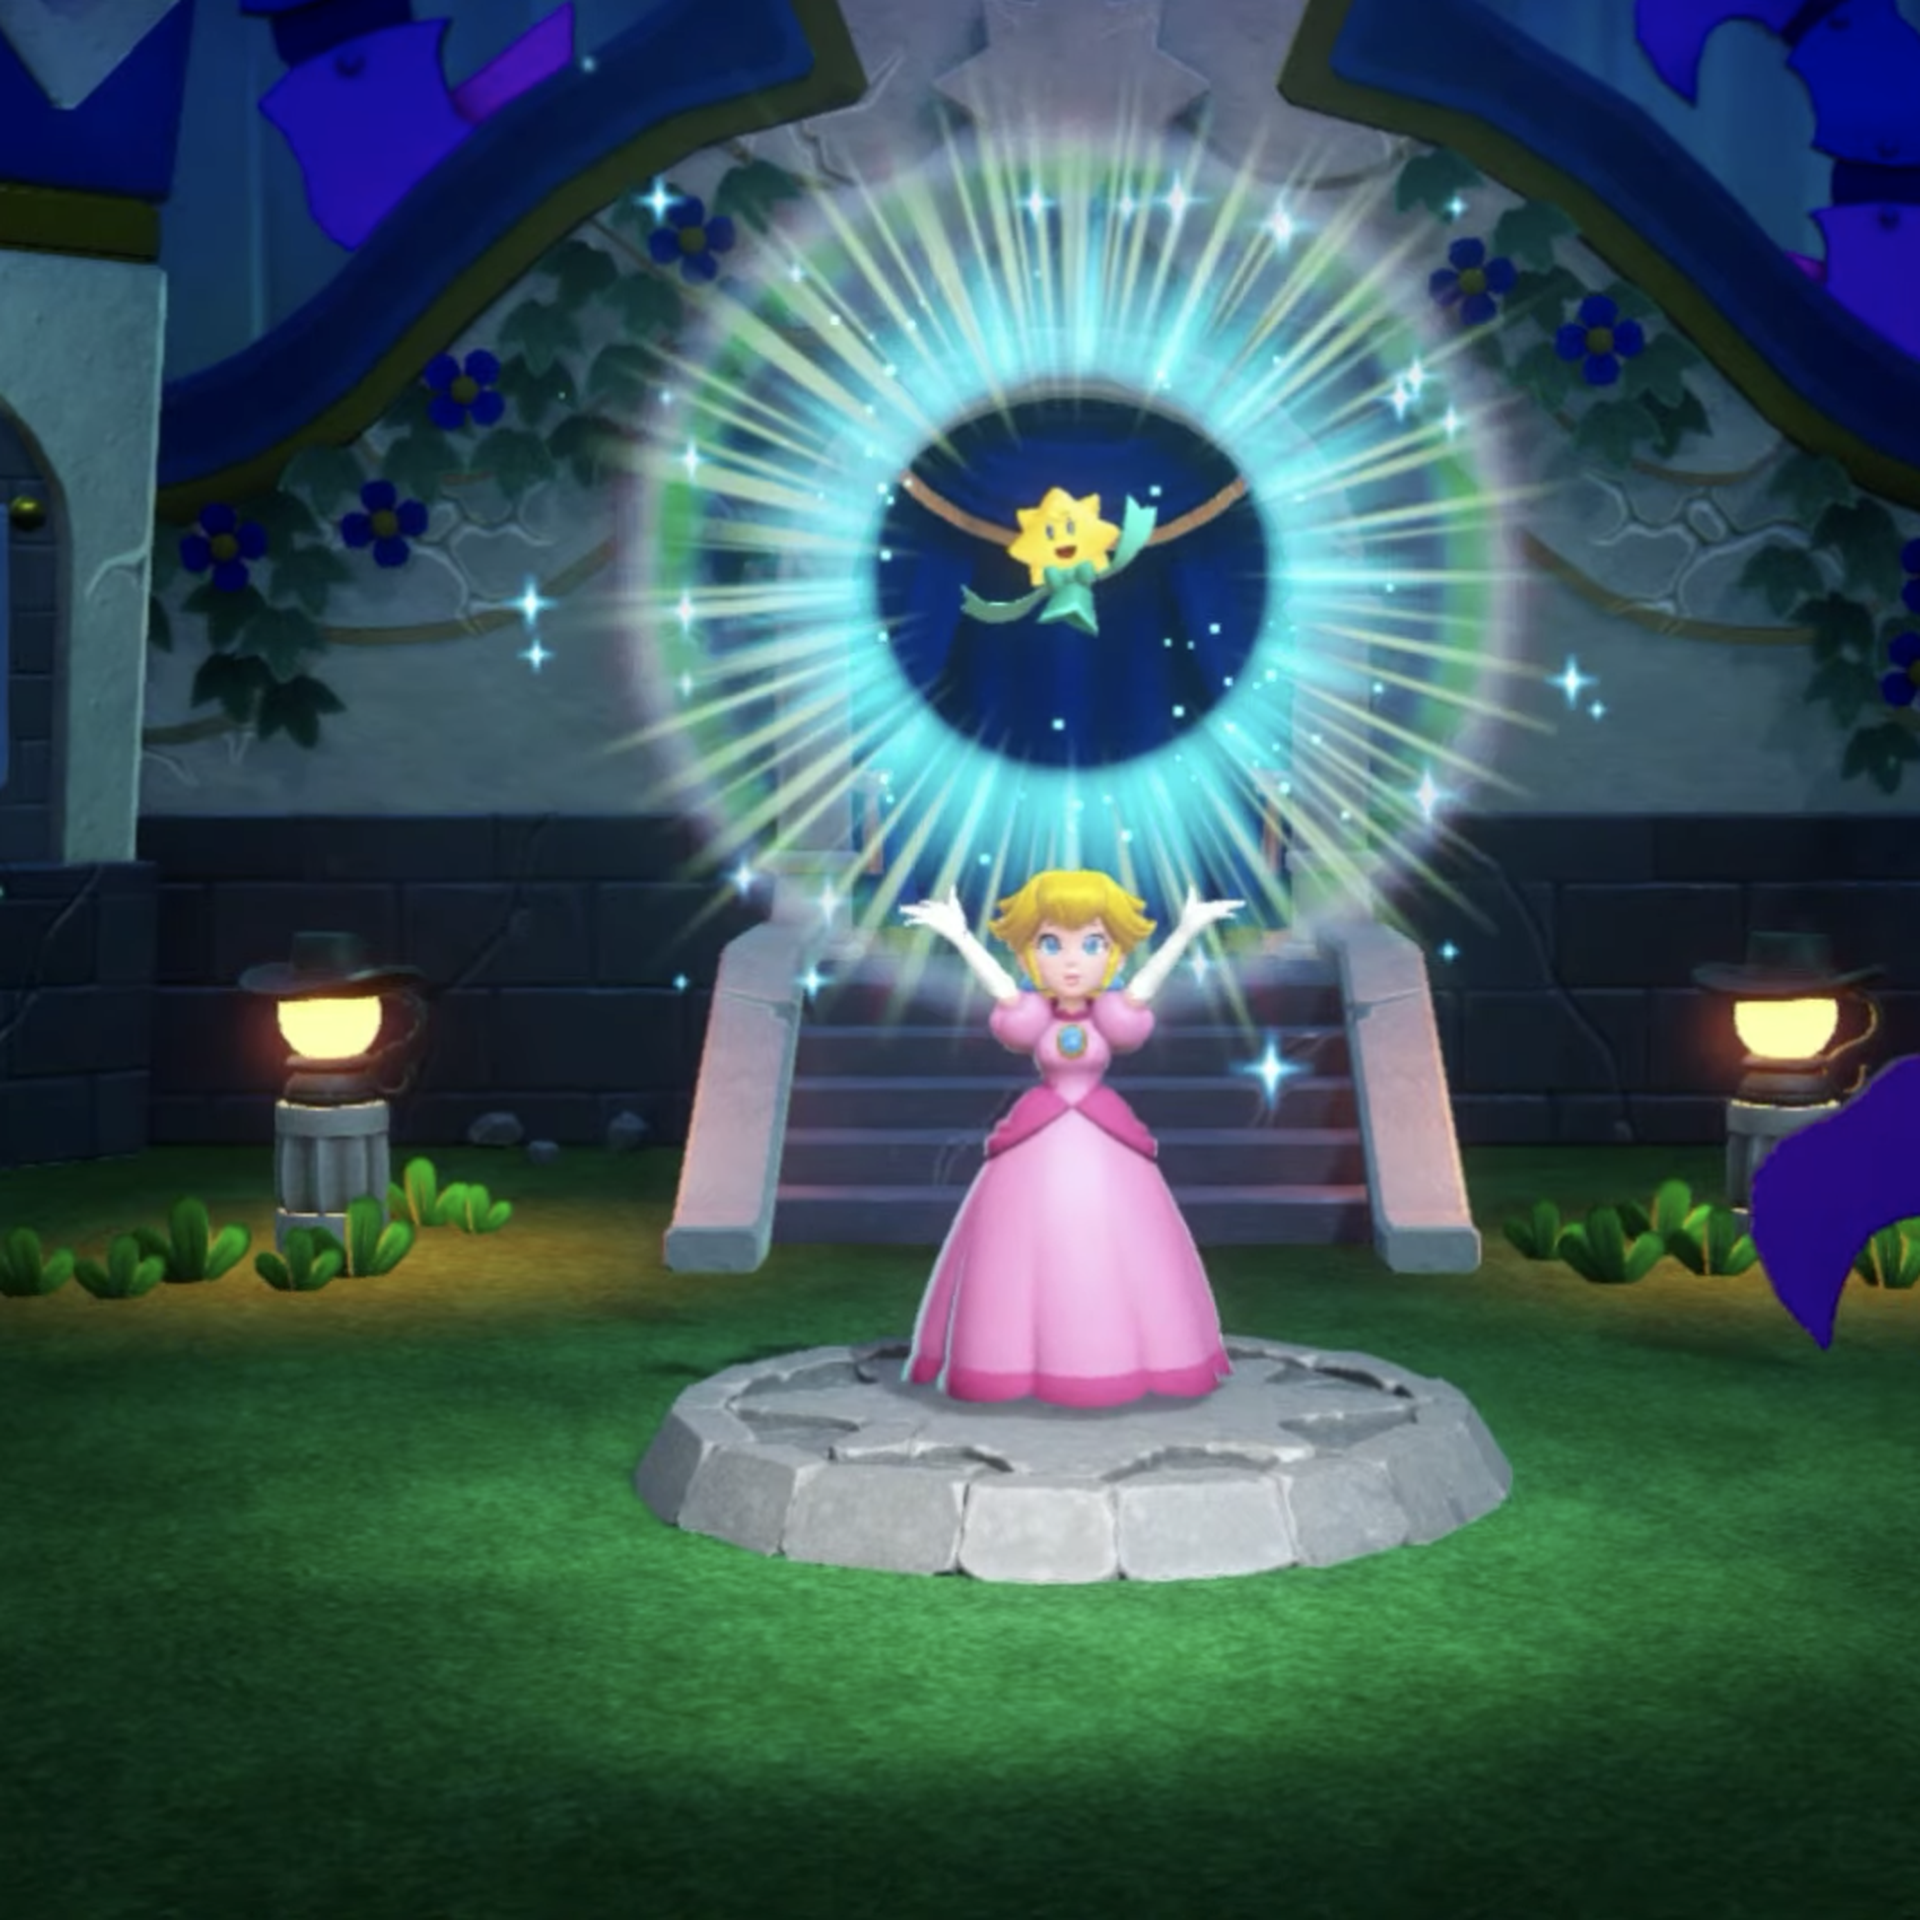 Princess Peach Is Getting Her Own Game Next Year - Game Informer